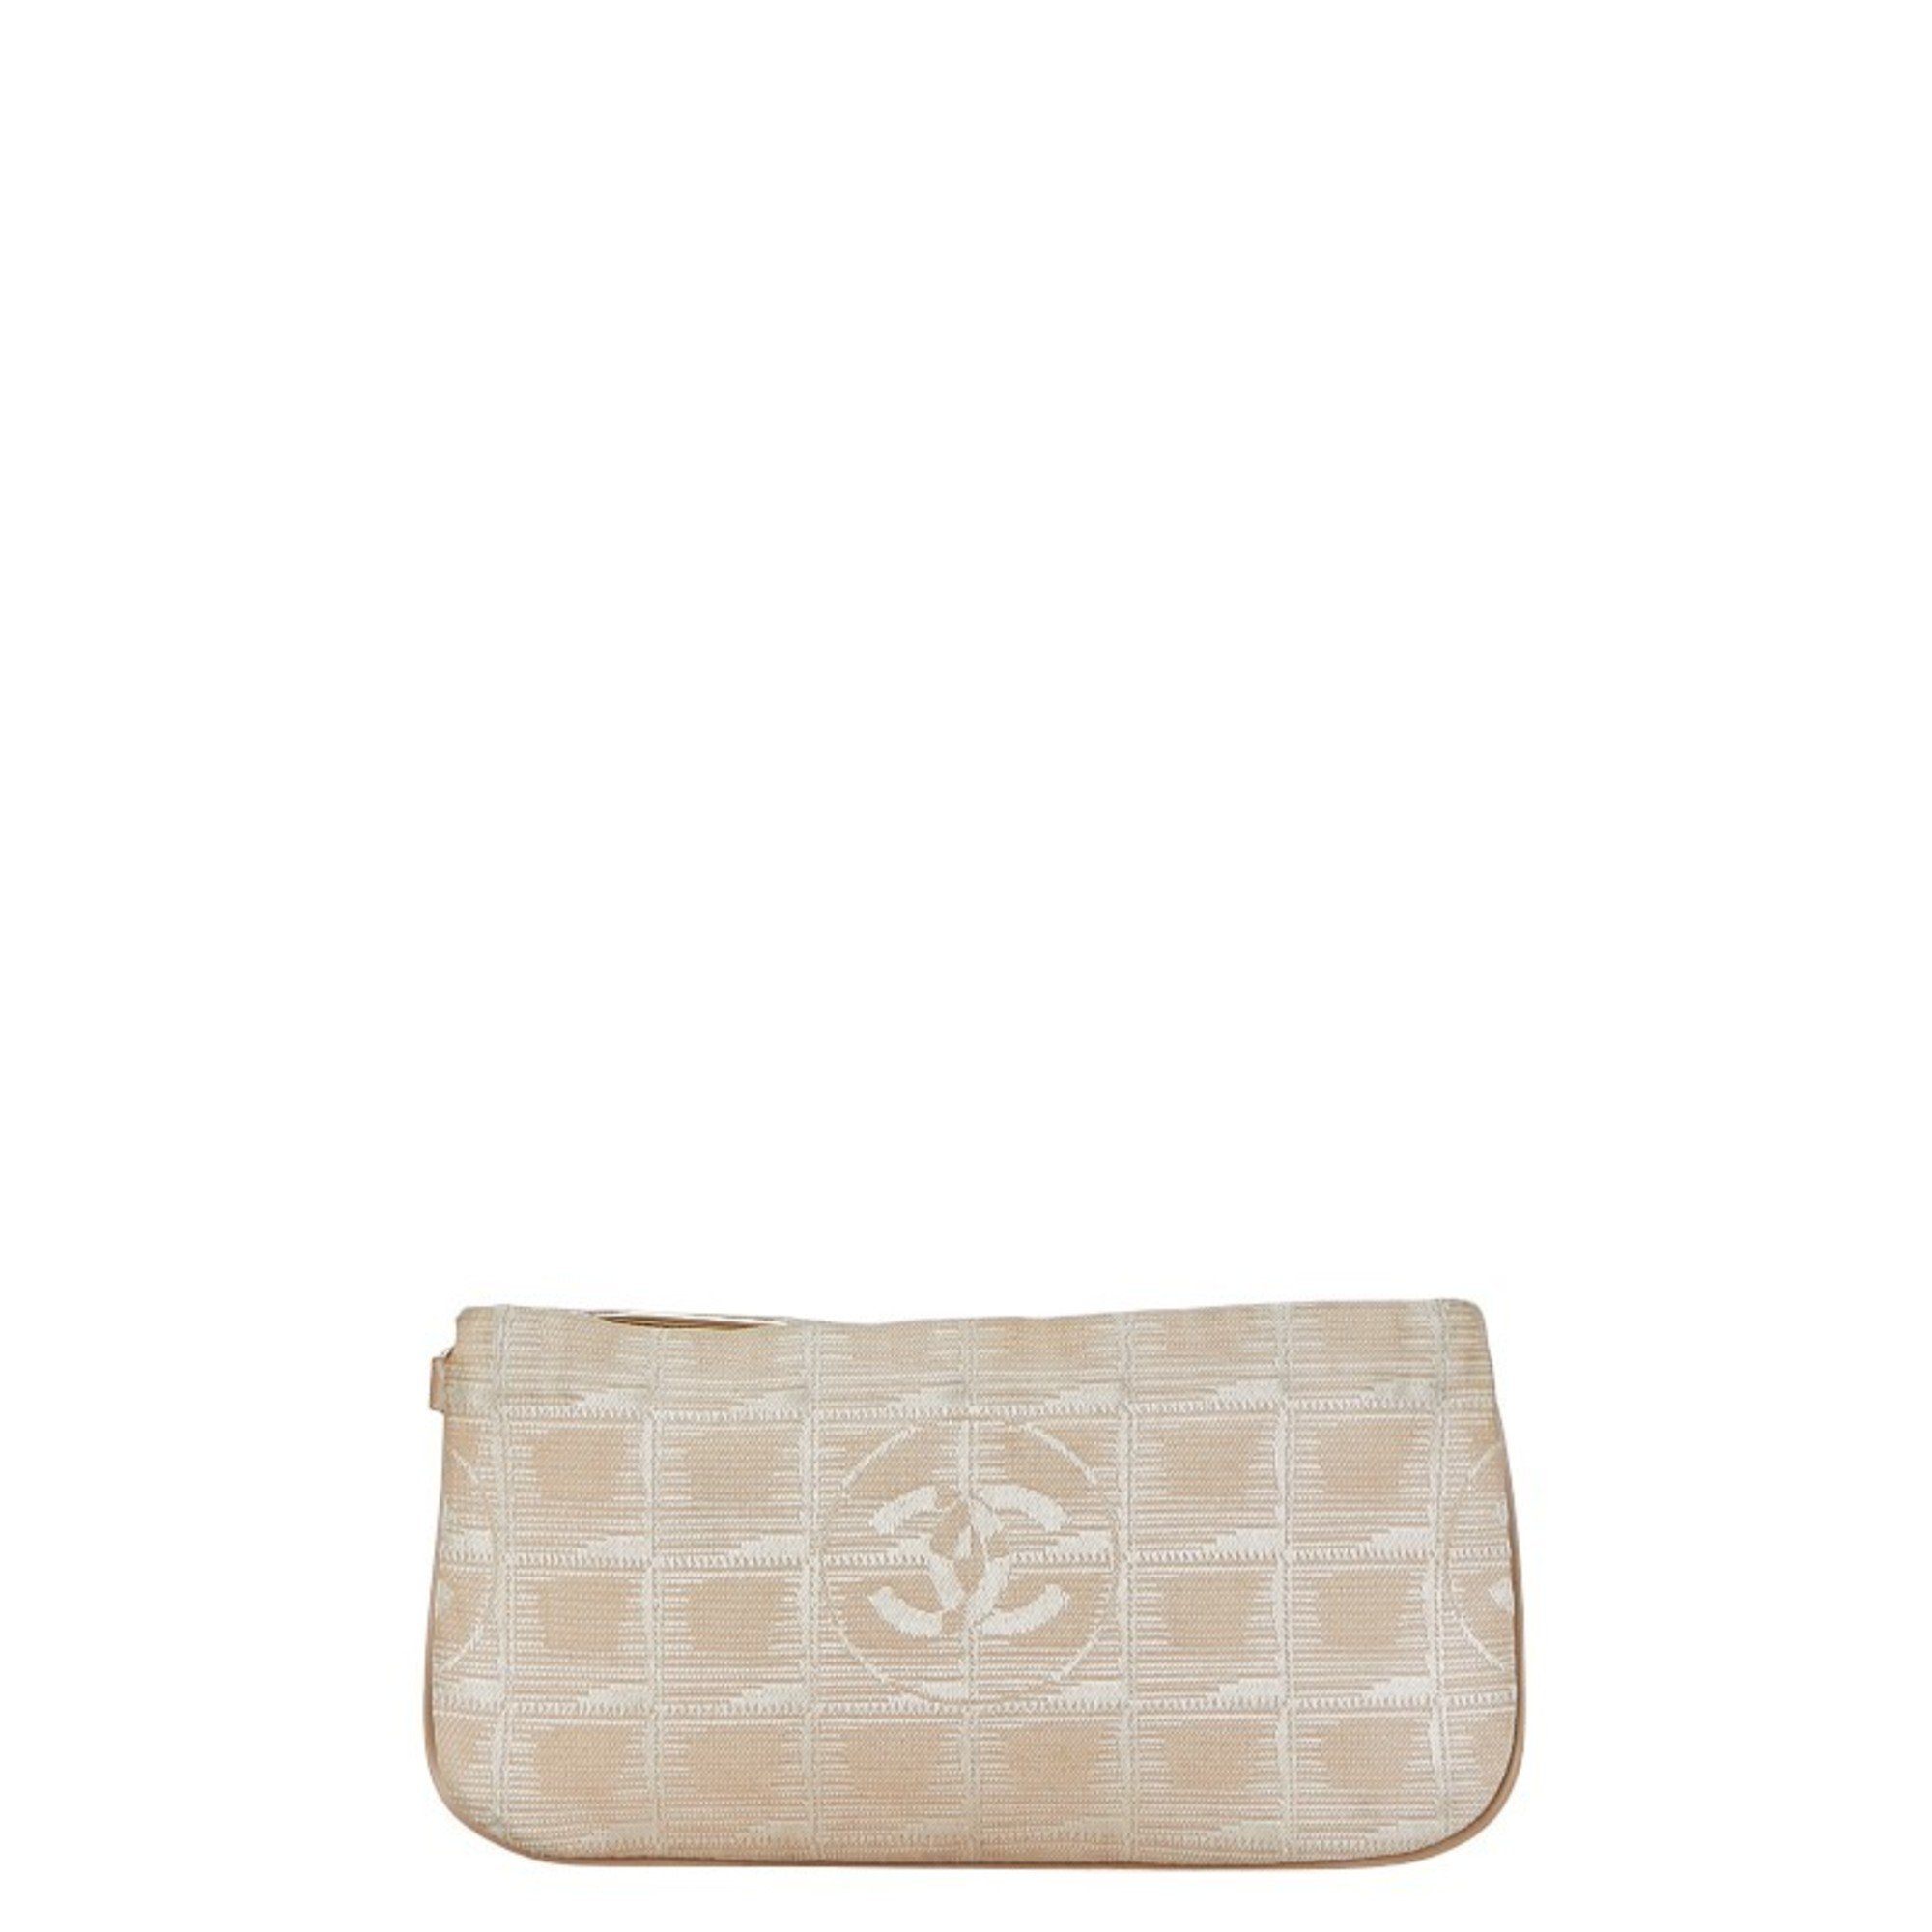 Chanel New Travel Line Coco Mark Pouch Beige Canvas Leather Women's CHANEL